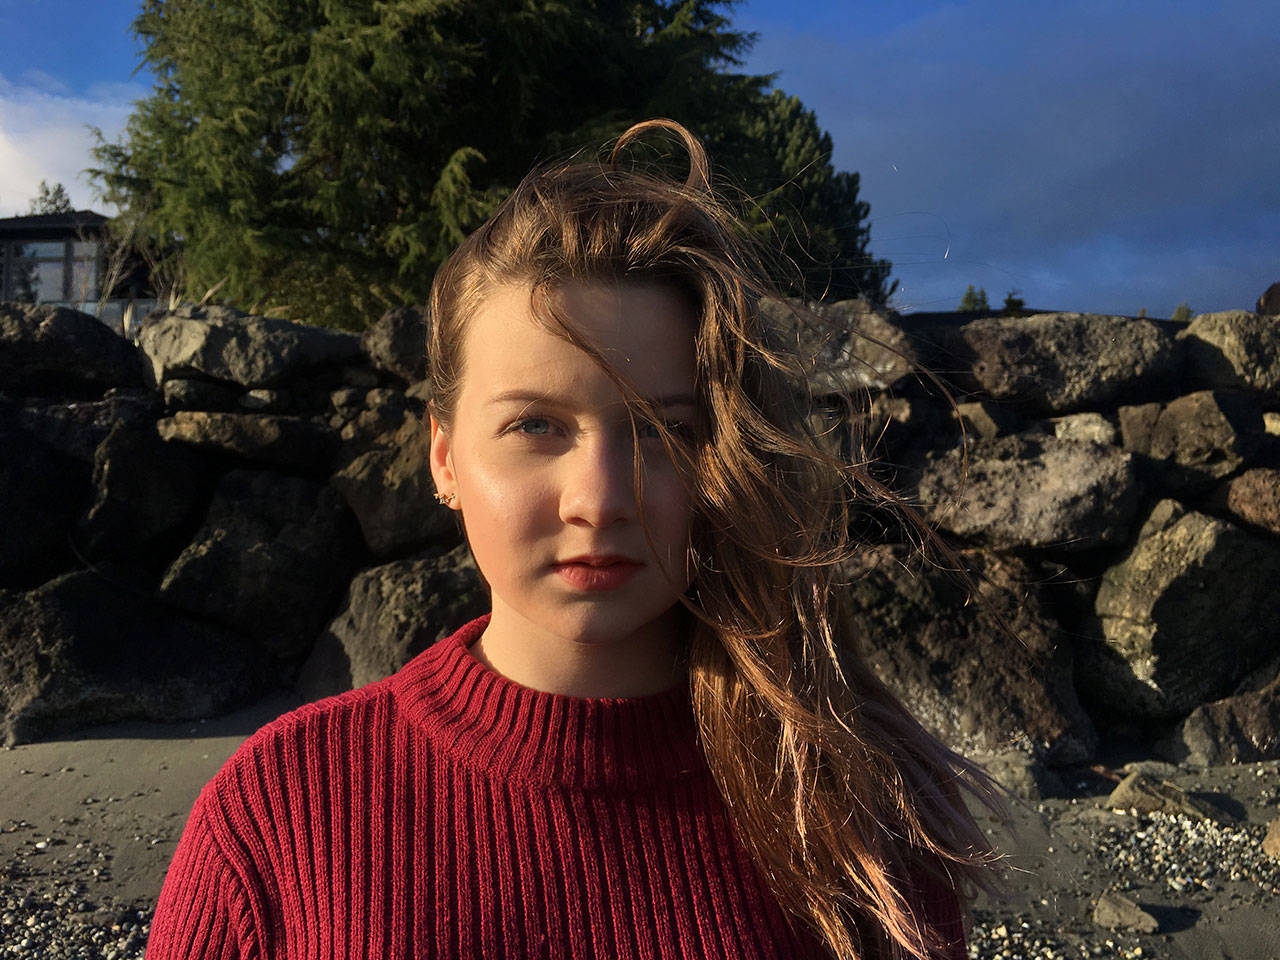 Photo courtesy of Lucia Opalka | Lutzie, the stage name of Bainbridge Island teen singer-songwriter Lucia Opalka, will release her new single “Butterfly” Friday, Aug. 16.